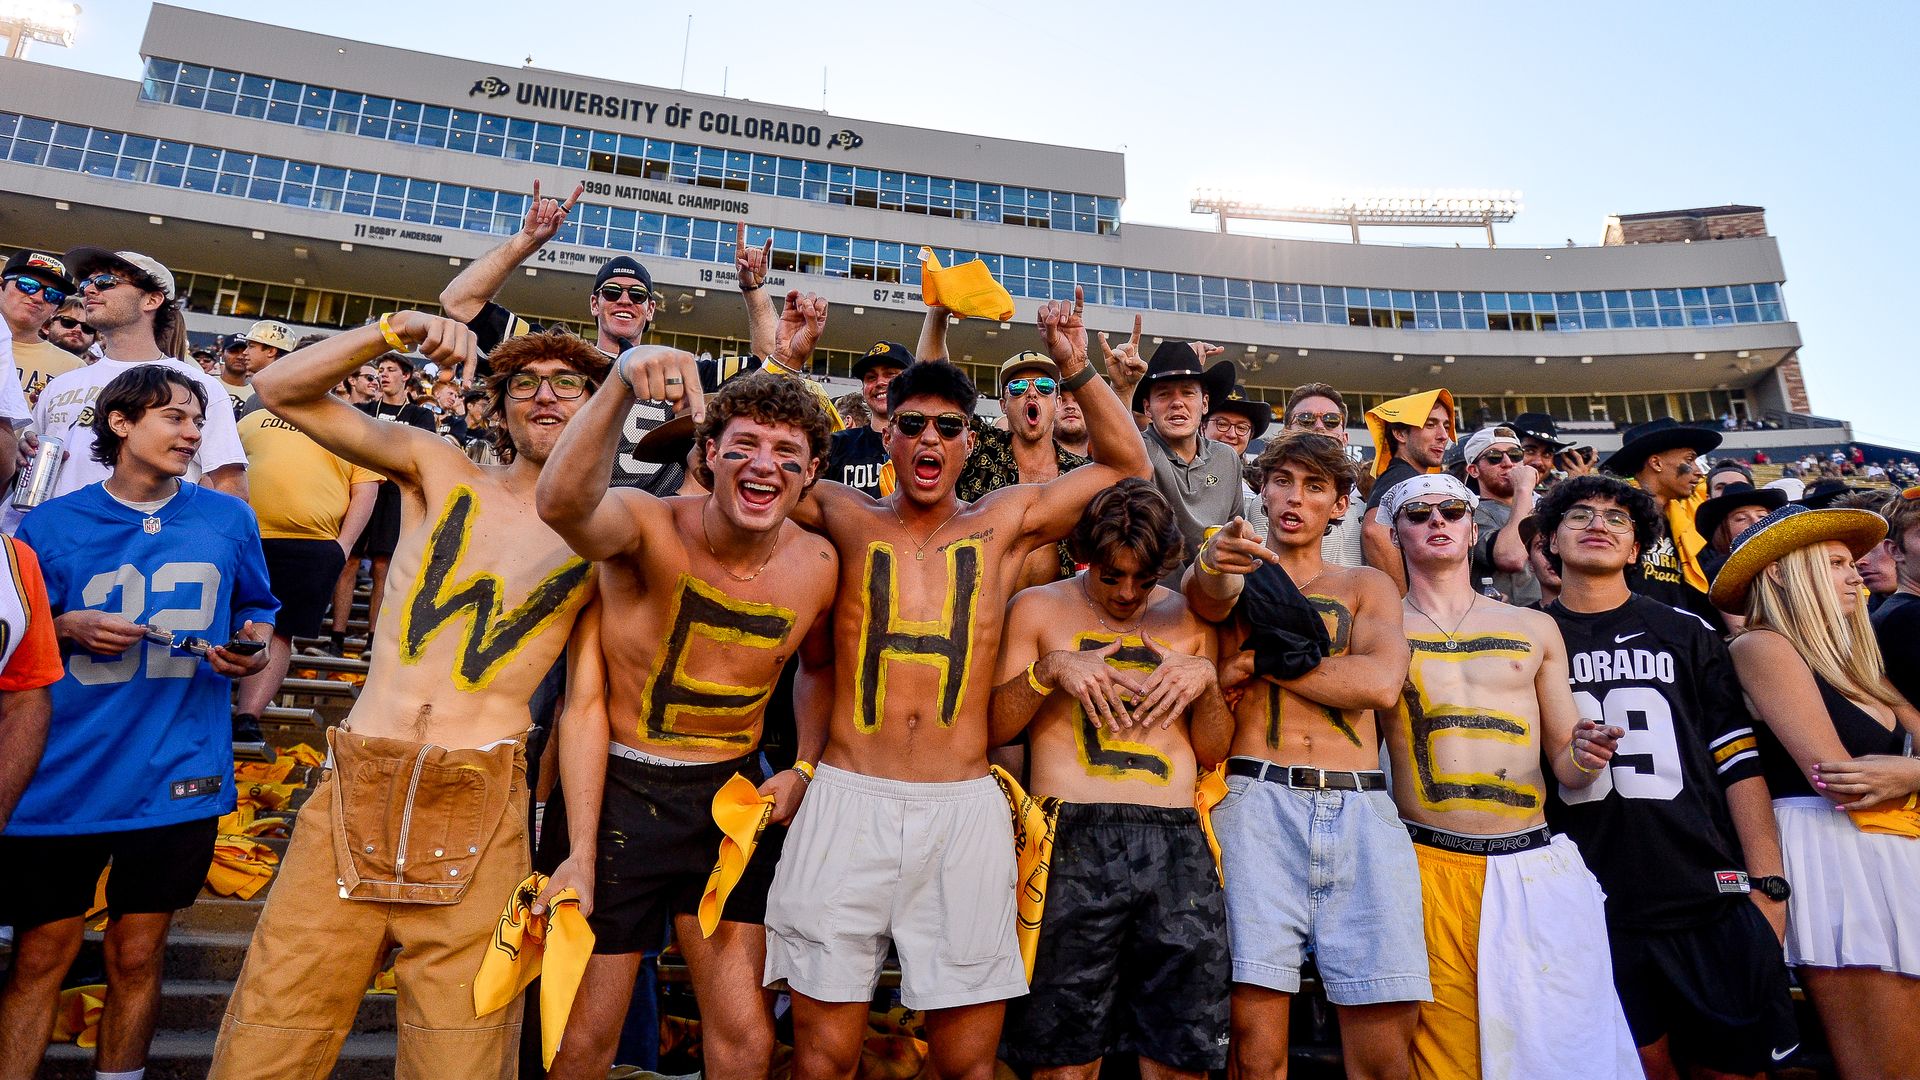 CU football fans wear paint reading "We Here" as they cheer from the student section at the Saturday game against the Nebraska Cornhuskers. Photo: Dustin Bradford/Getty Images